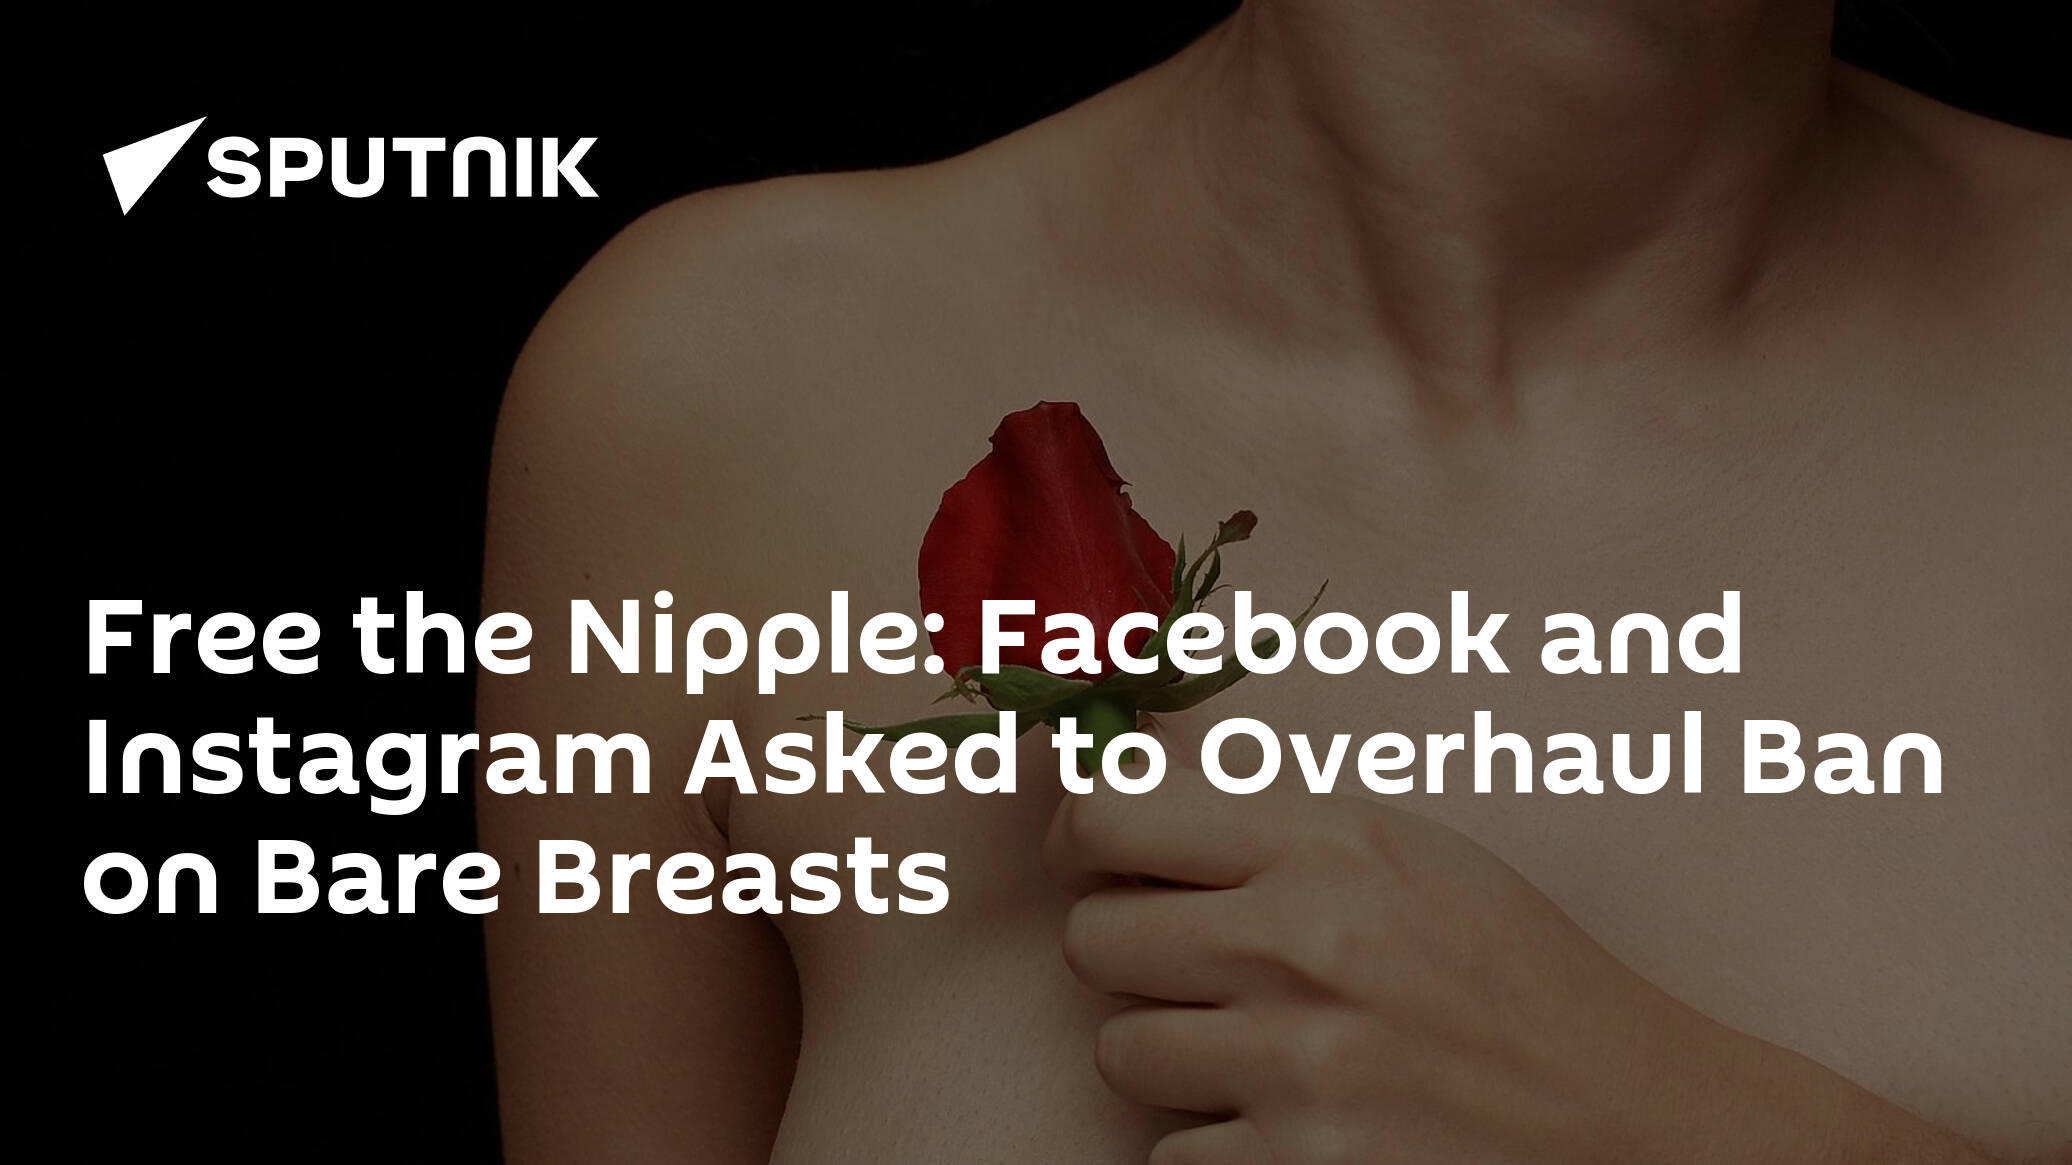 Facebook, Instagram may lift ban on bare breasts -- but only for